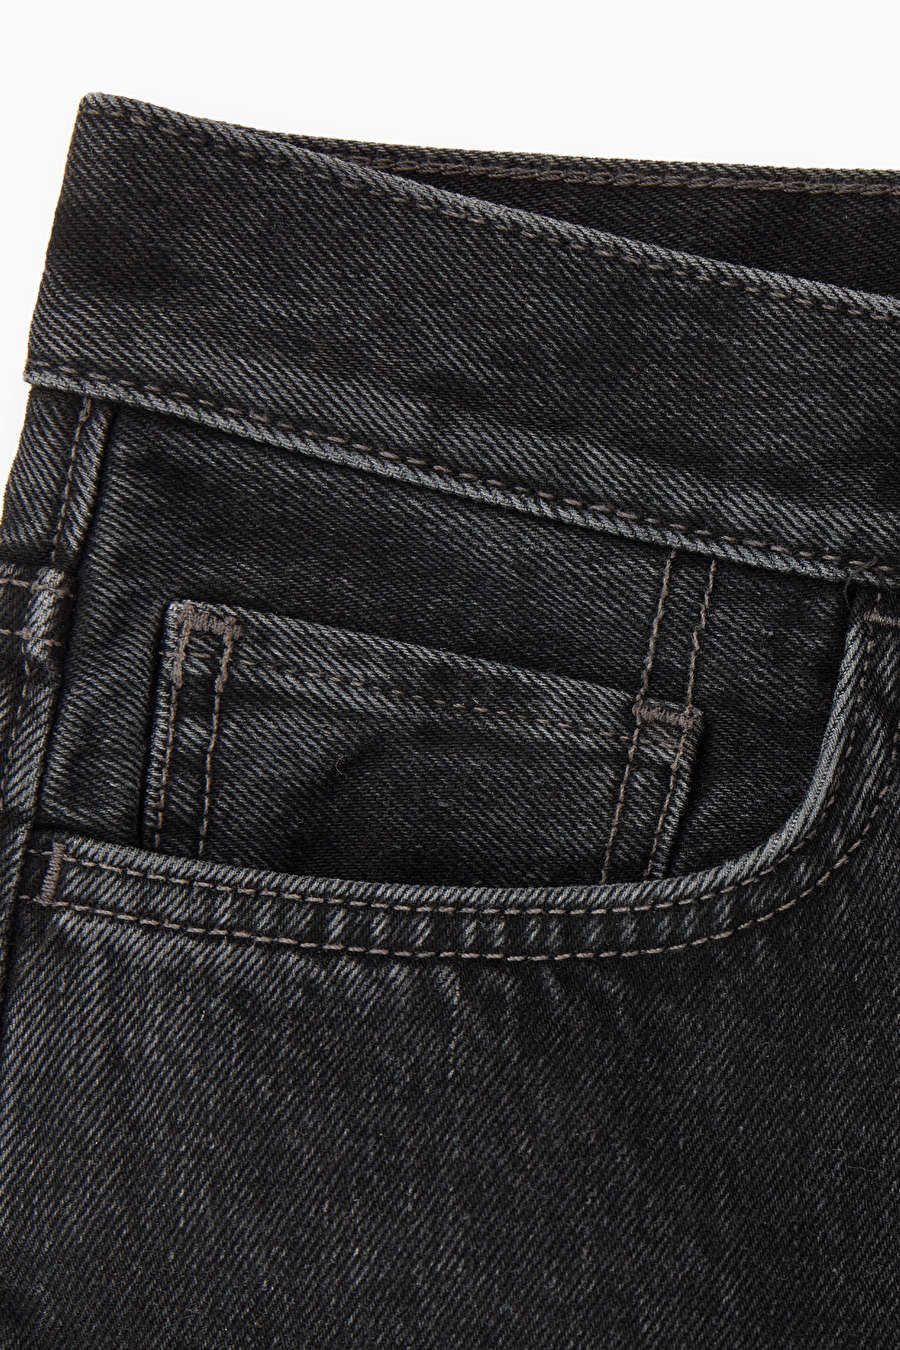 ARCH JEANS - TAPERED - BLACK - COS | COS UK